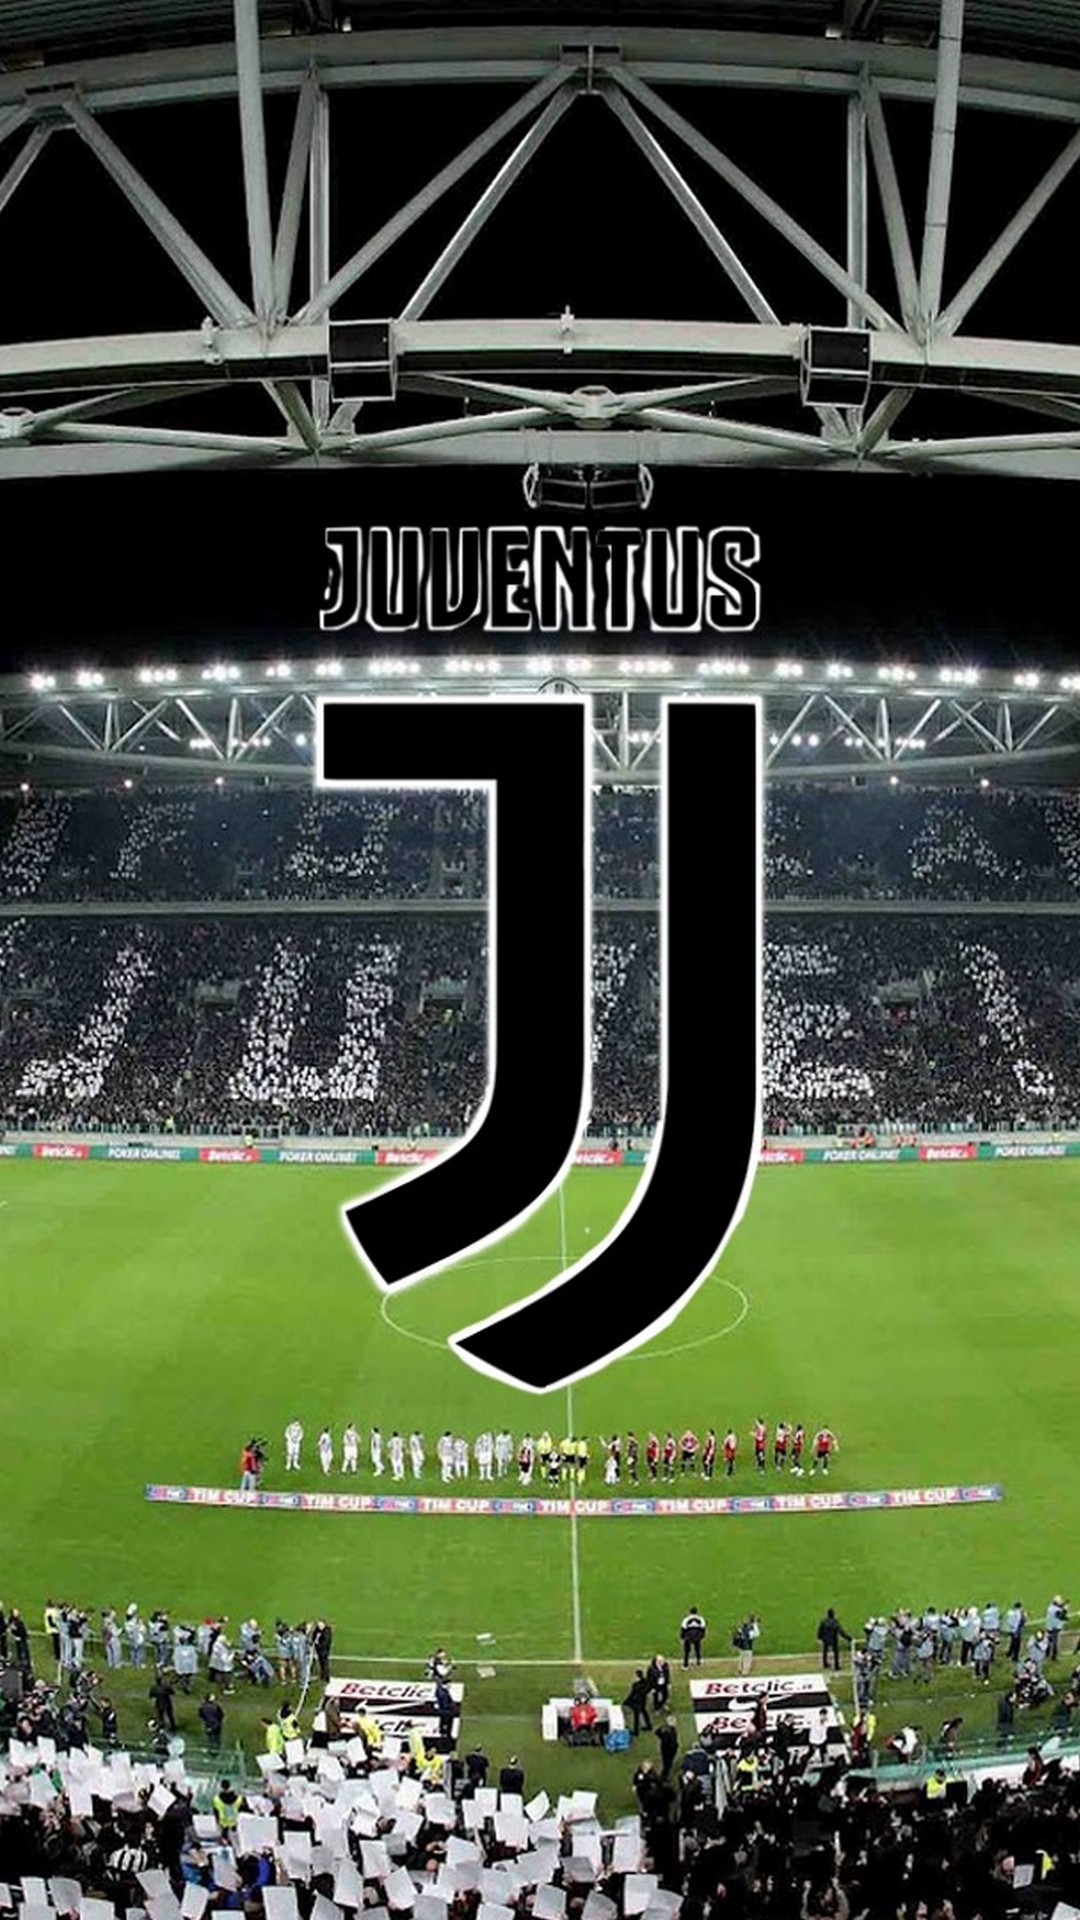 Juventus HD Wallpaper For iPhone With Resolution 1080X1920 pixel. You can make this wallpaper for your Mac or Windows Desktop Background, iPhone, Android or Tablet and another Smartphone device for free